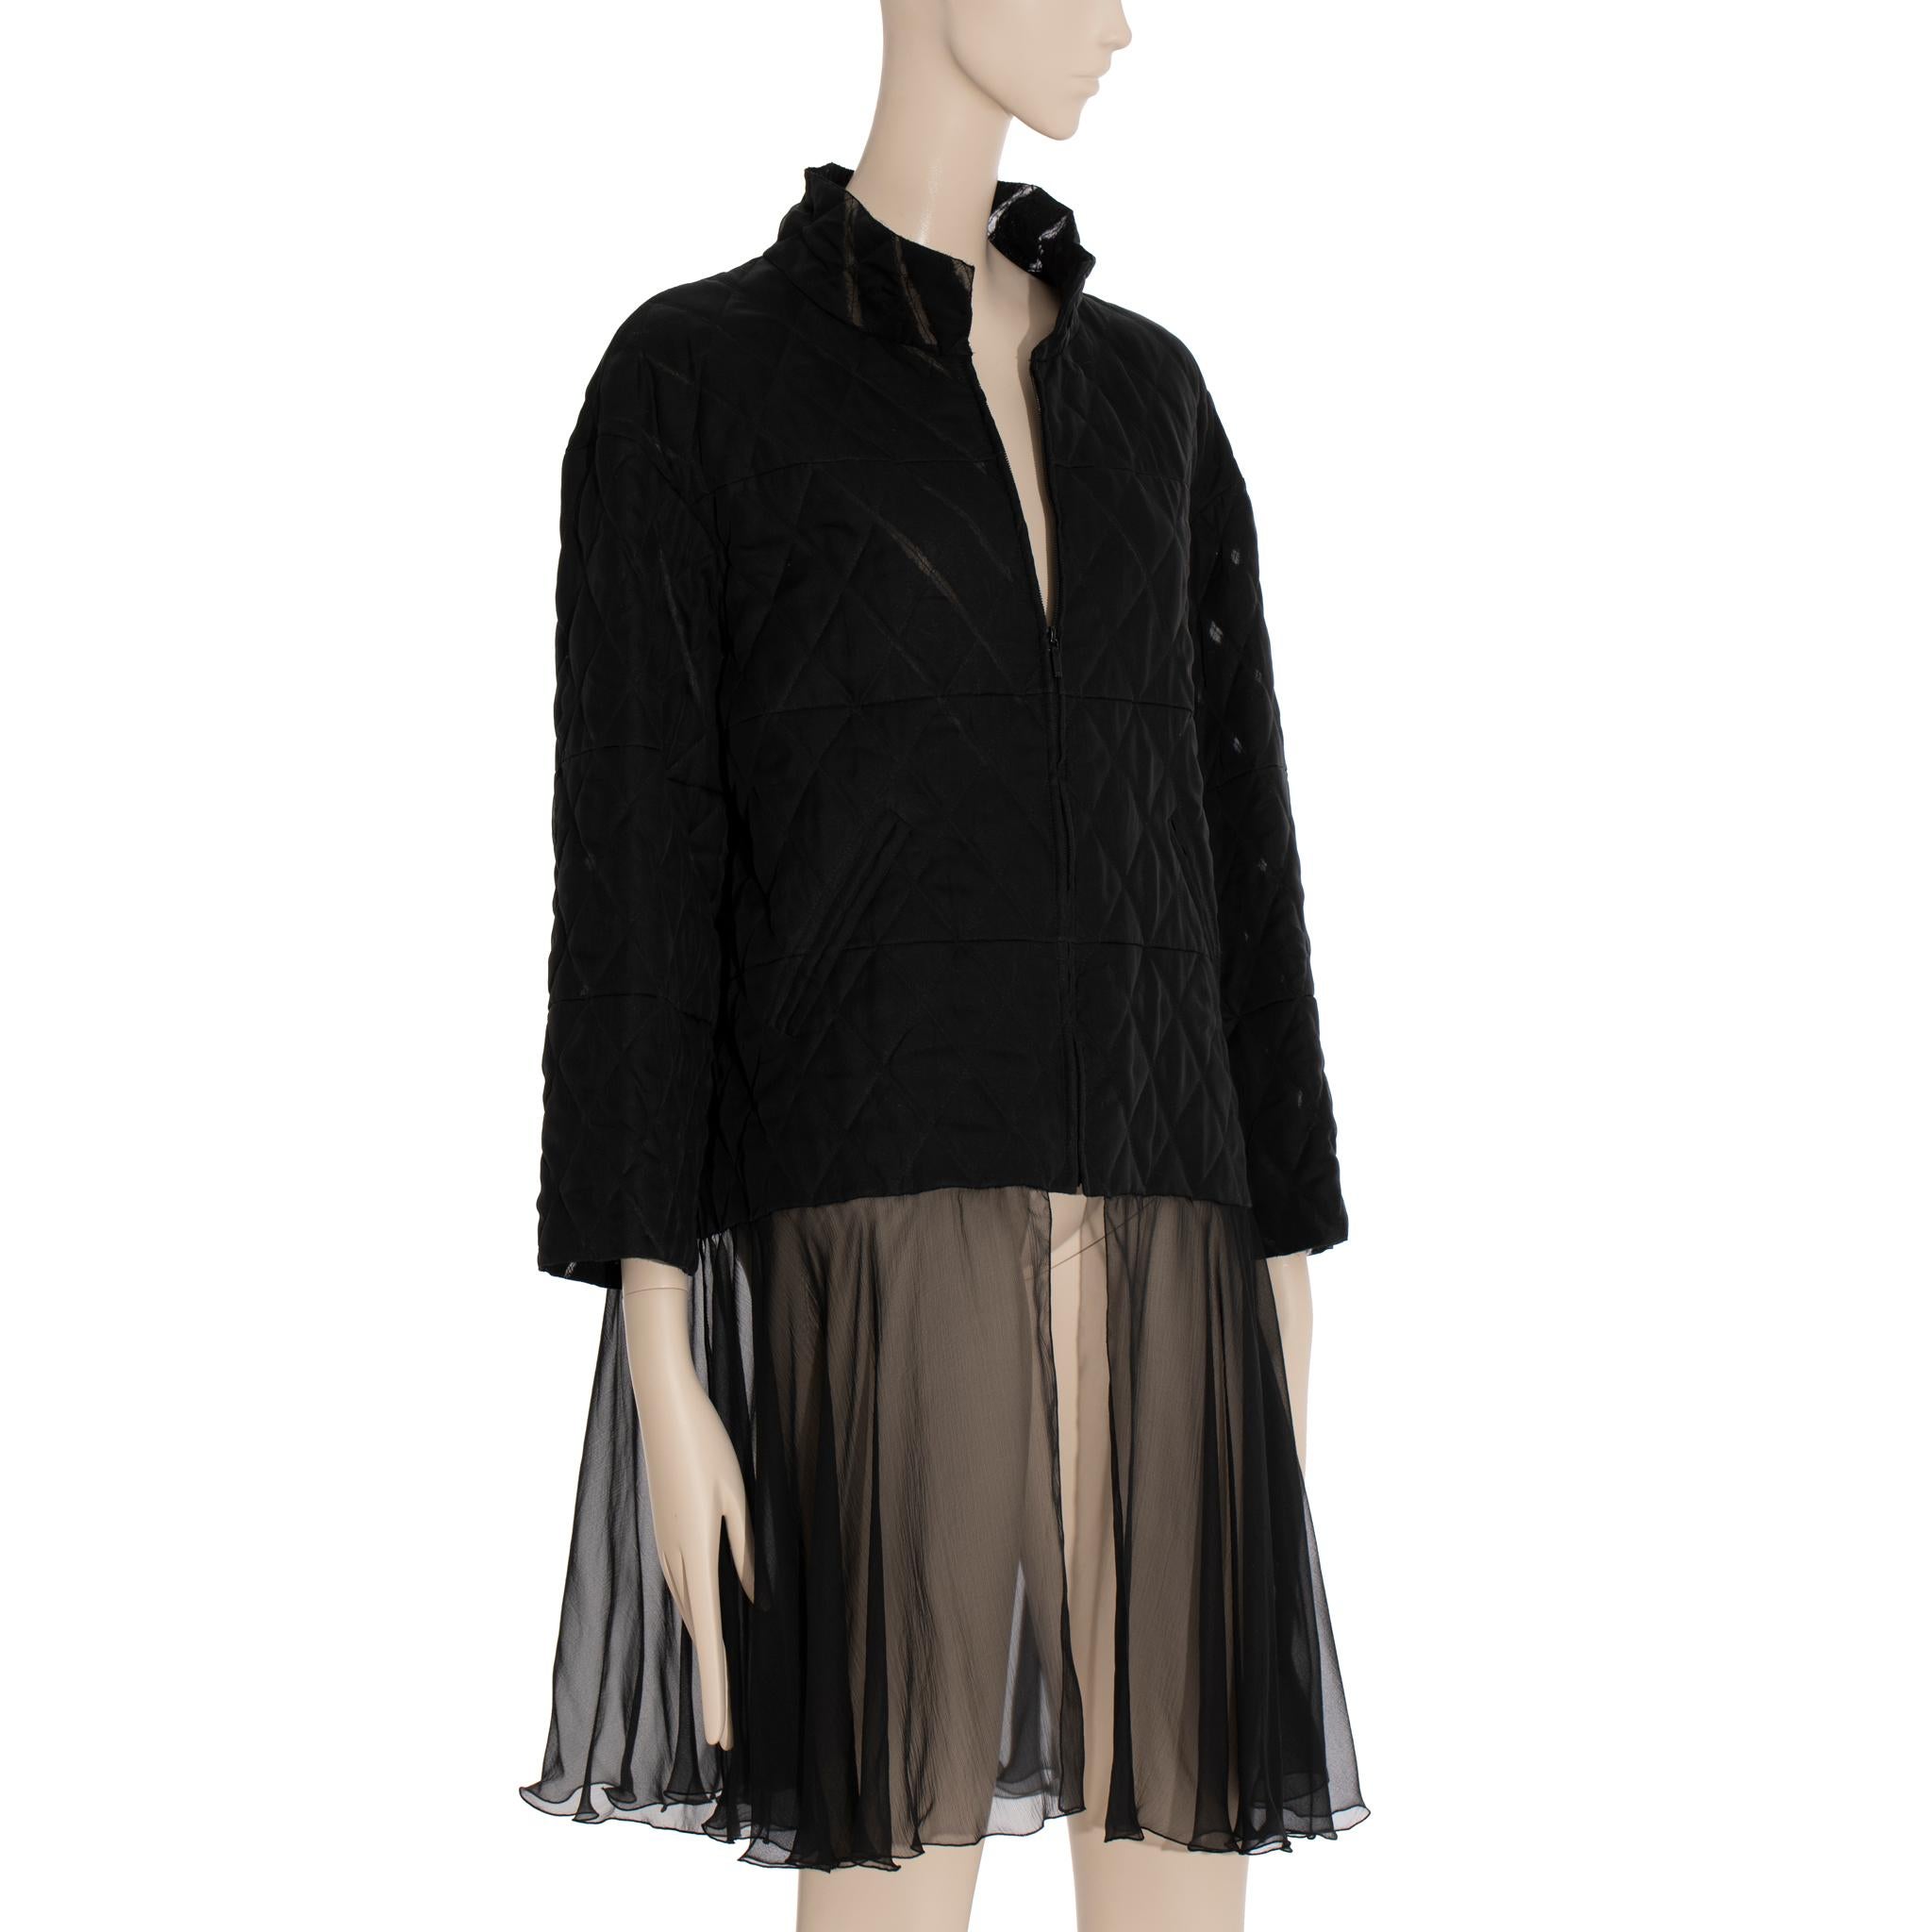 
Brand:

Chanel

Product:

Jacket With Sheer Skirt

Size:

42 Fr

Colour:

Black

Material:



Product Code:	P45987V30914
Condition:

Excellent:

The product is in excellent condition, displaying minimal signs of wear. The product has been